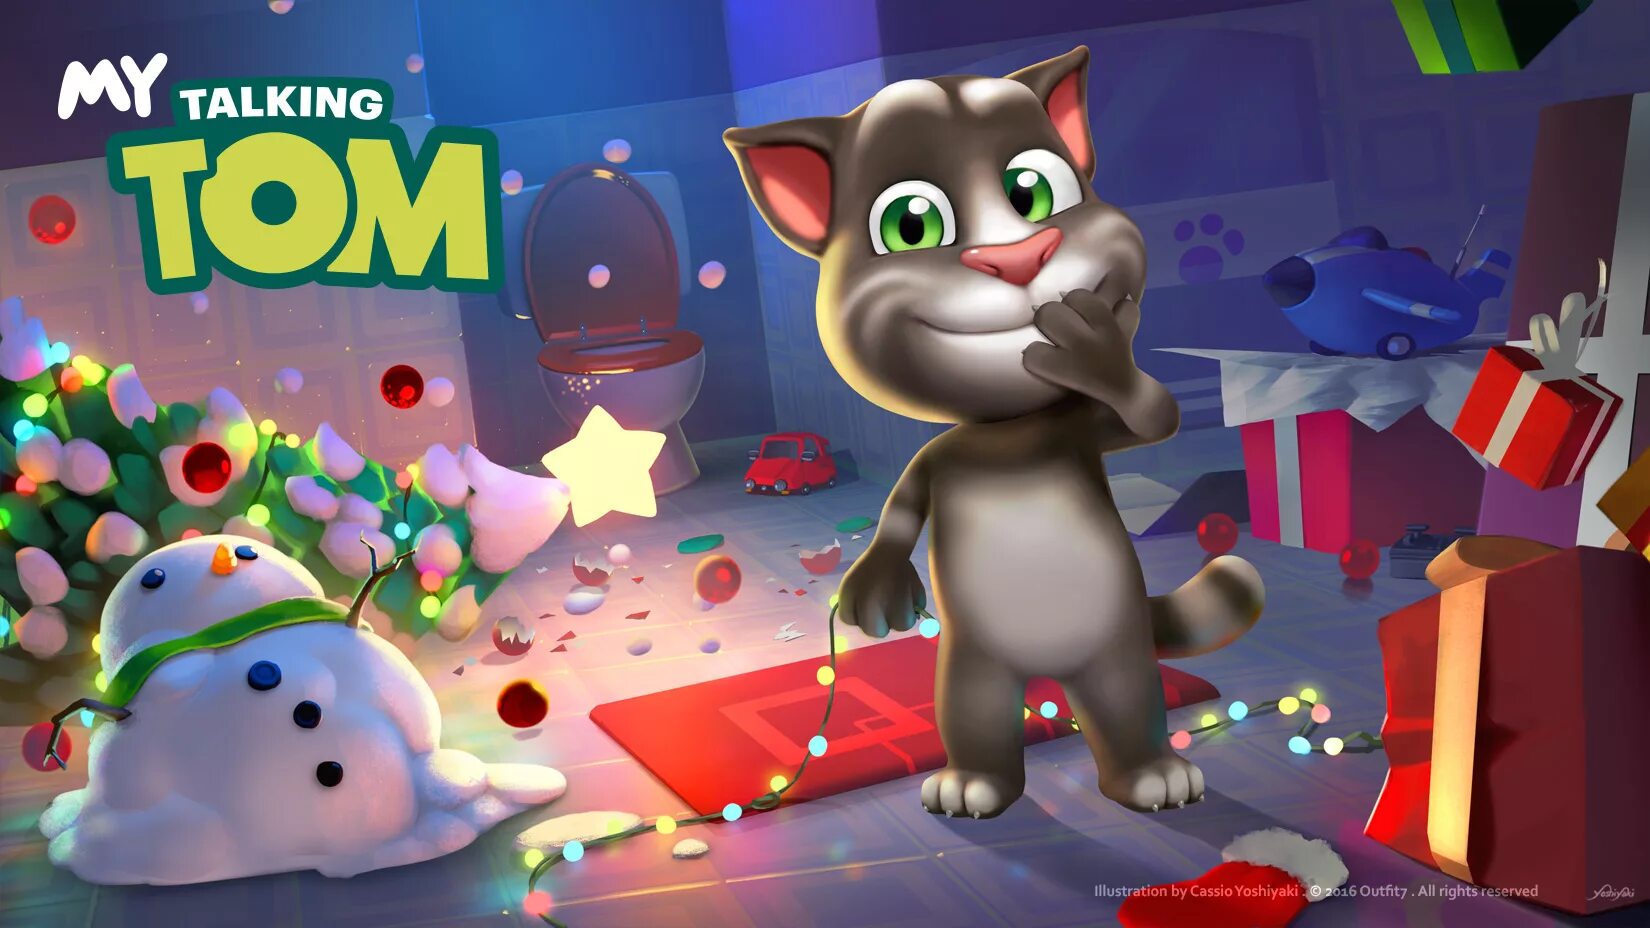 Игры май том. Talking Tom. My talking Tom and friends игра. Outfit7 talking Tom зима. Outfit7 talking Tom мой говорящий.